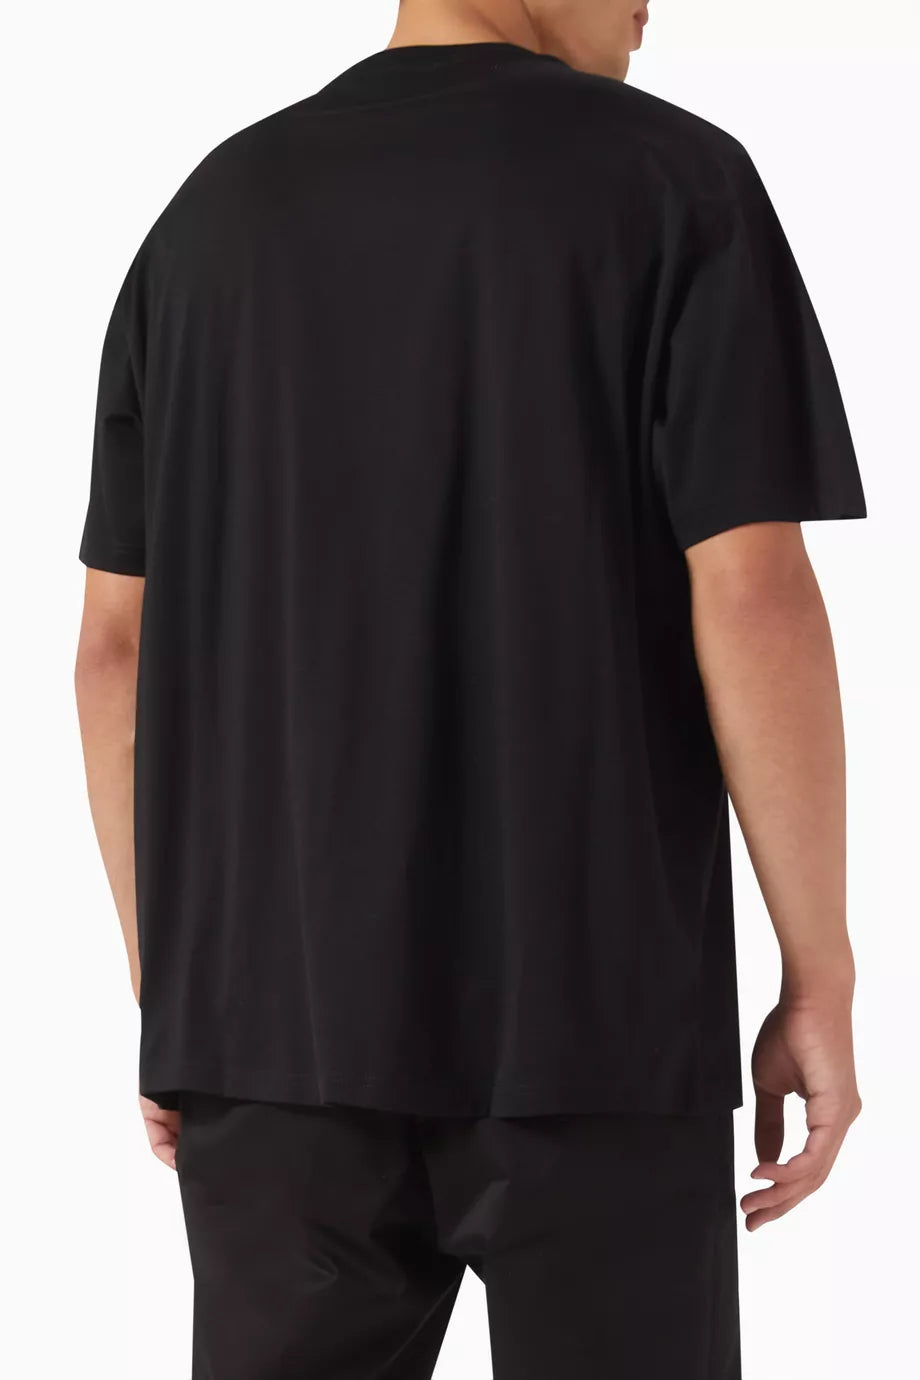 Burberry Tristan T-Shirt in Cotton Stretch